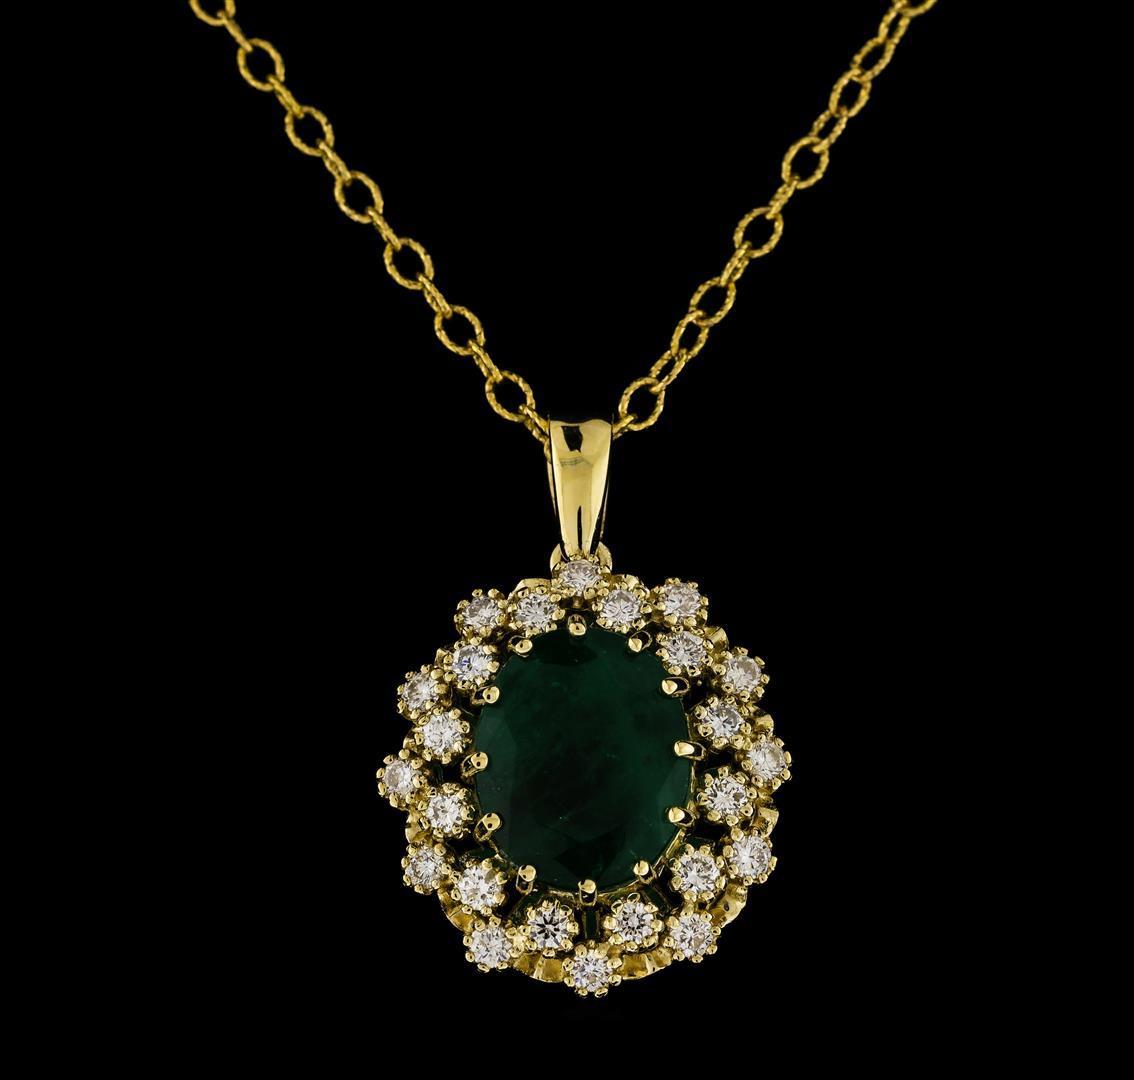 4.30 ctw Emerald and Diamond Pendant With Chain - 14KT Yellow Gold